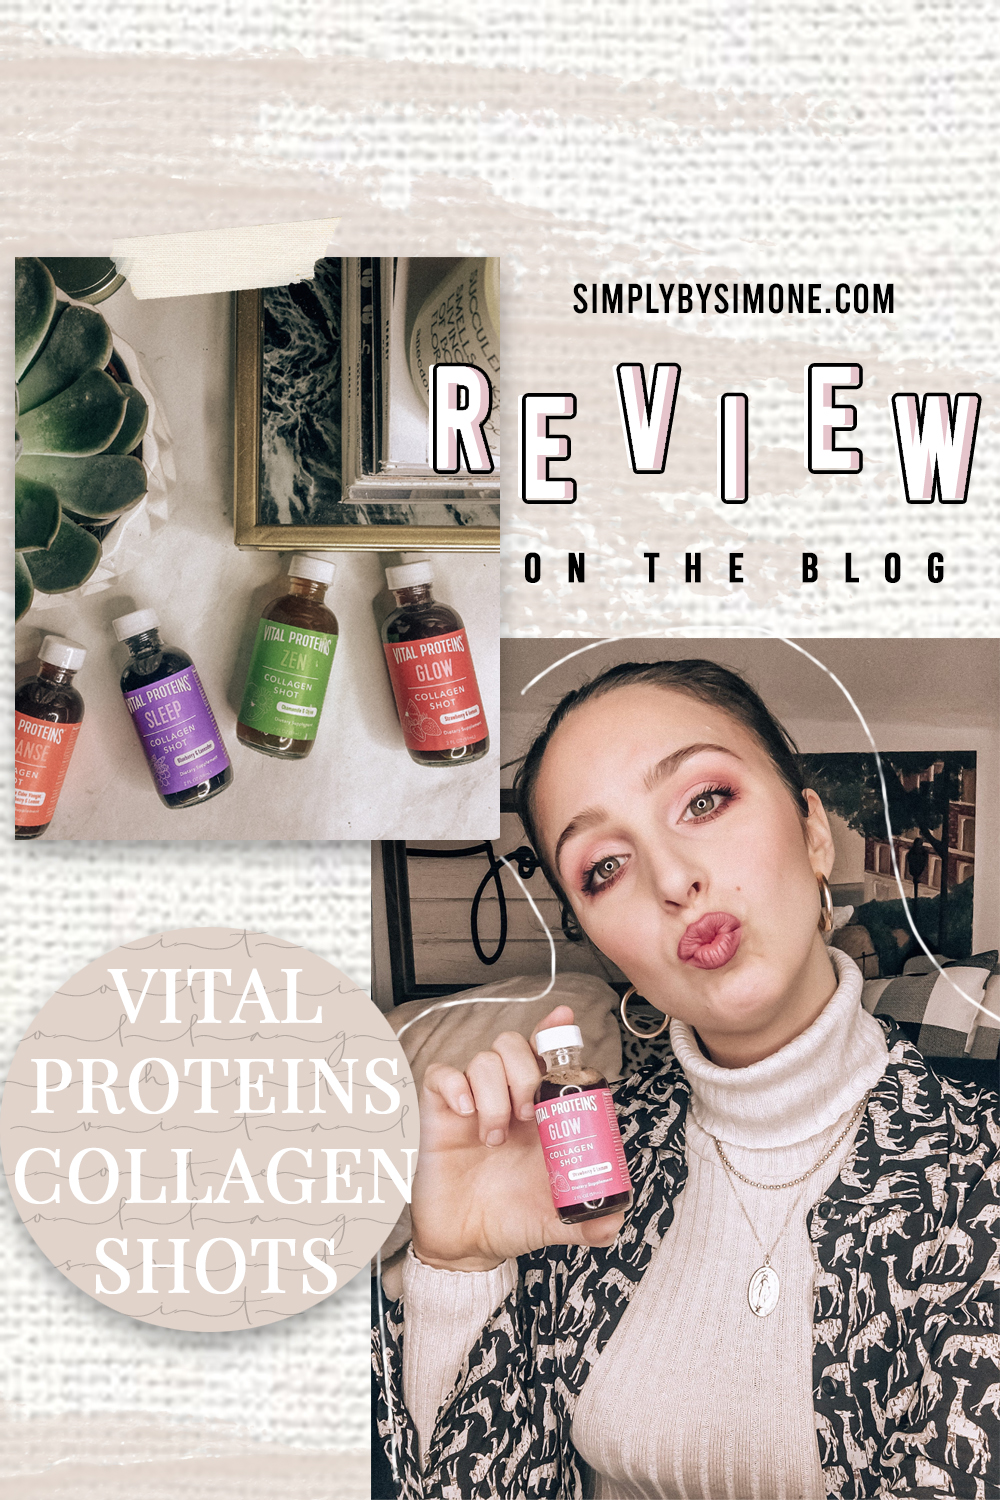 Read This Before You Buy - Vital Proteins Collagen Shots Review #health #wellness #collagen #vitalproteins #collagenpeptides #review #collagenshots #skincare #beauty #wellness Simone Piliero Simply by Simone Westcheter County Blogger